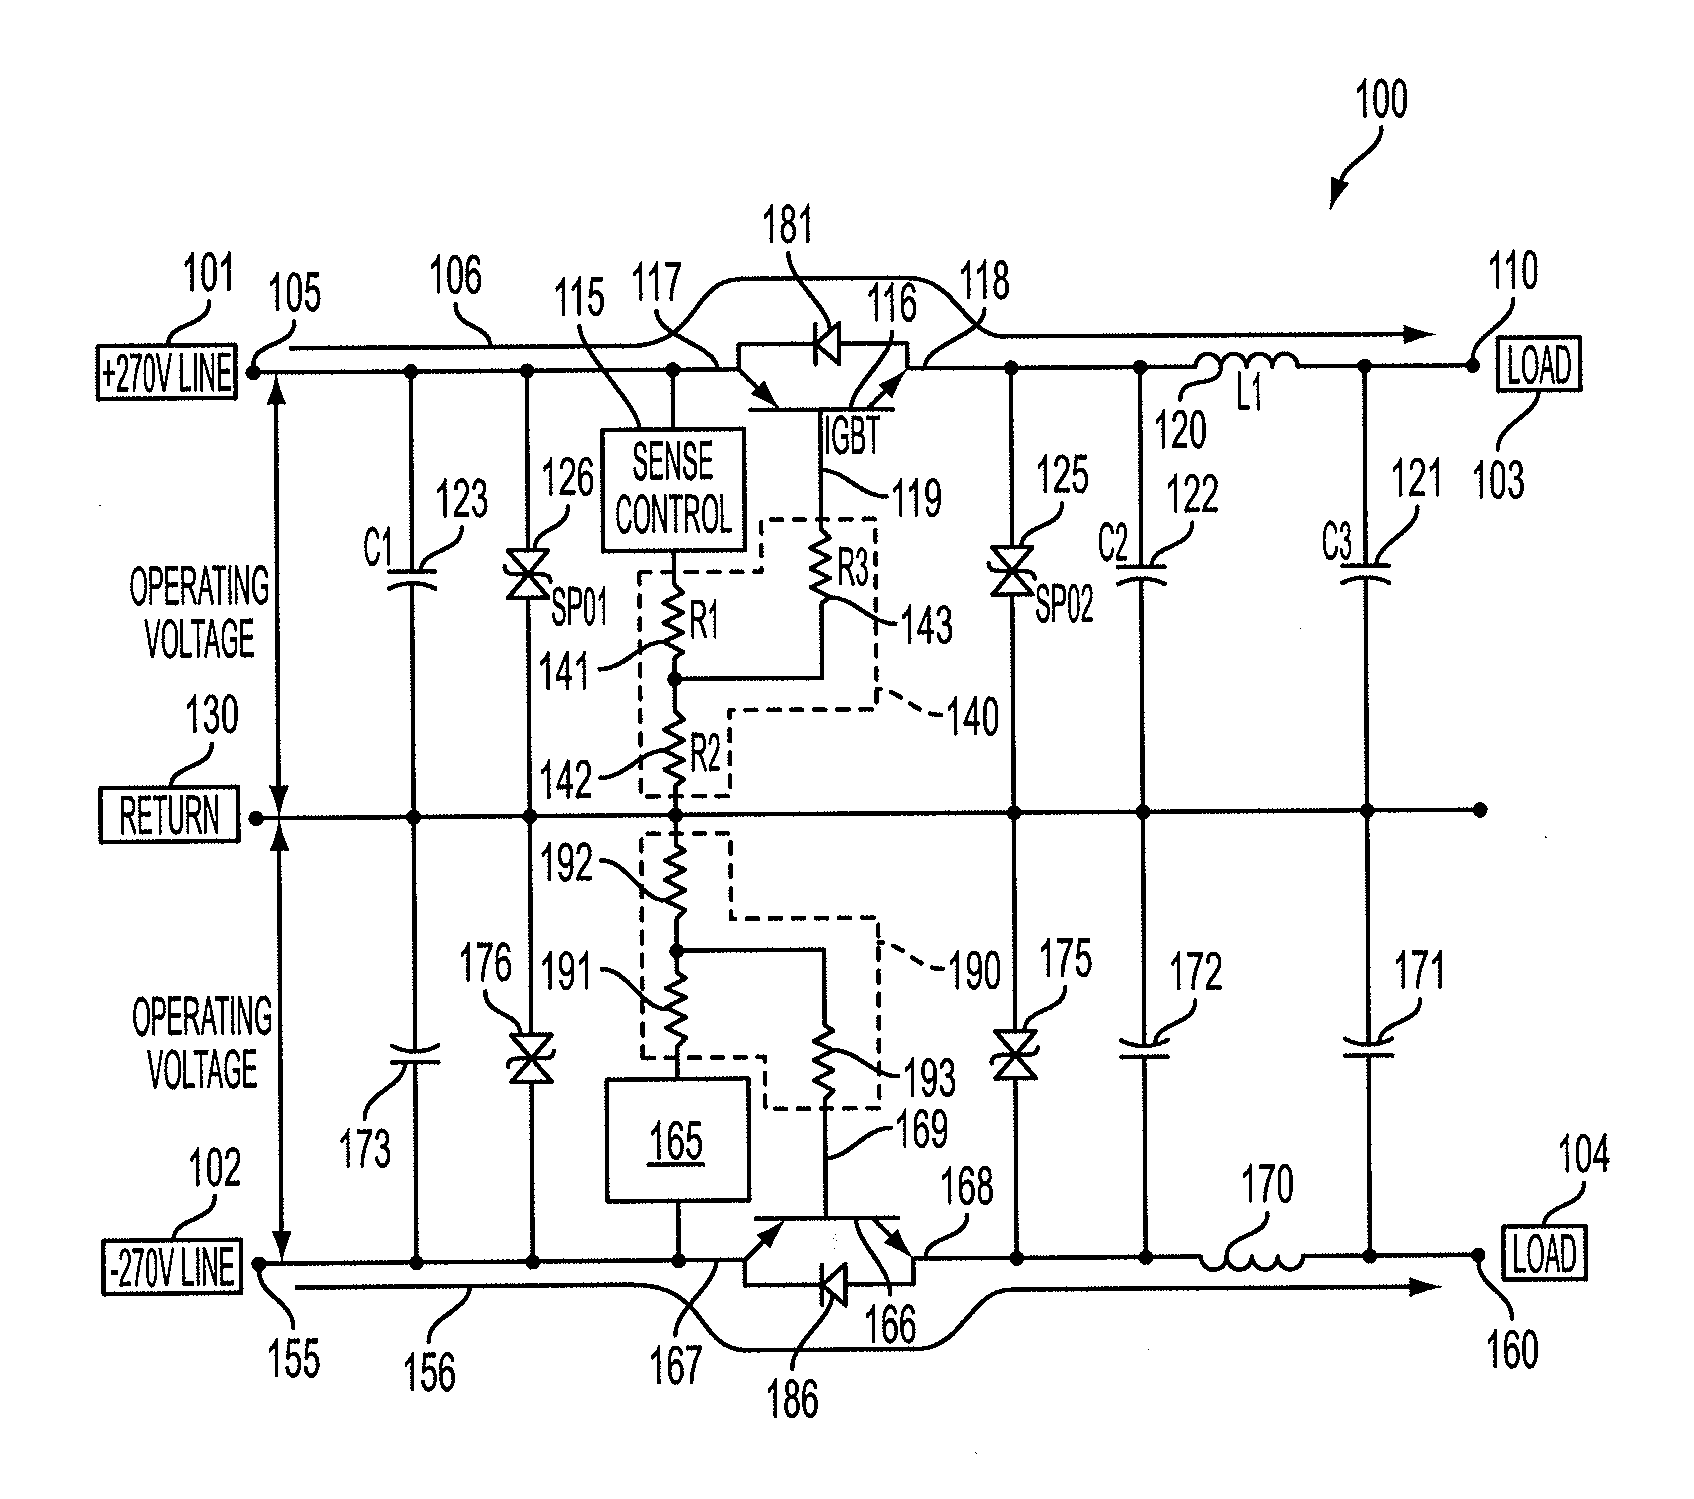 Transient control technology circuit